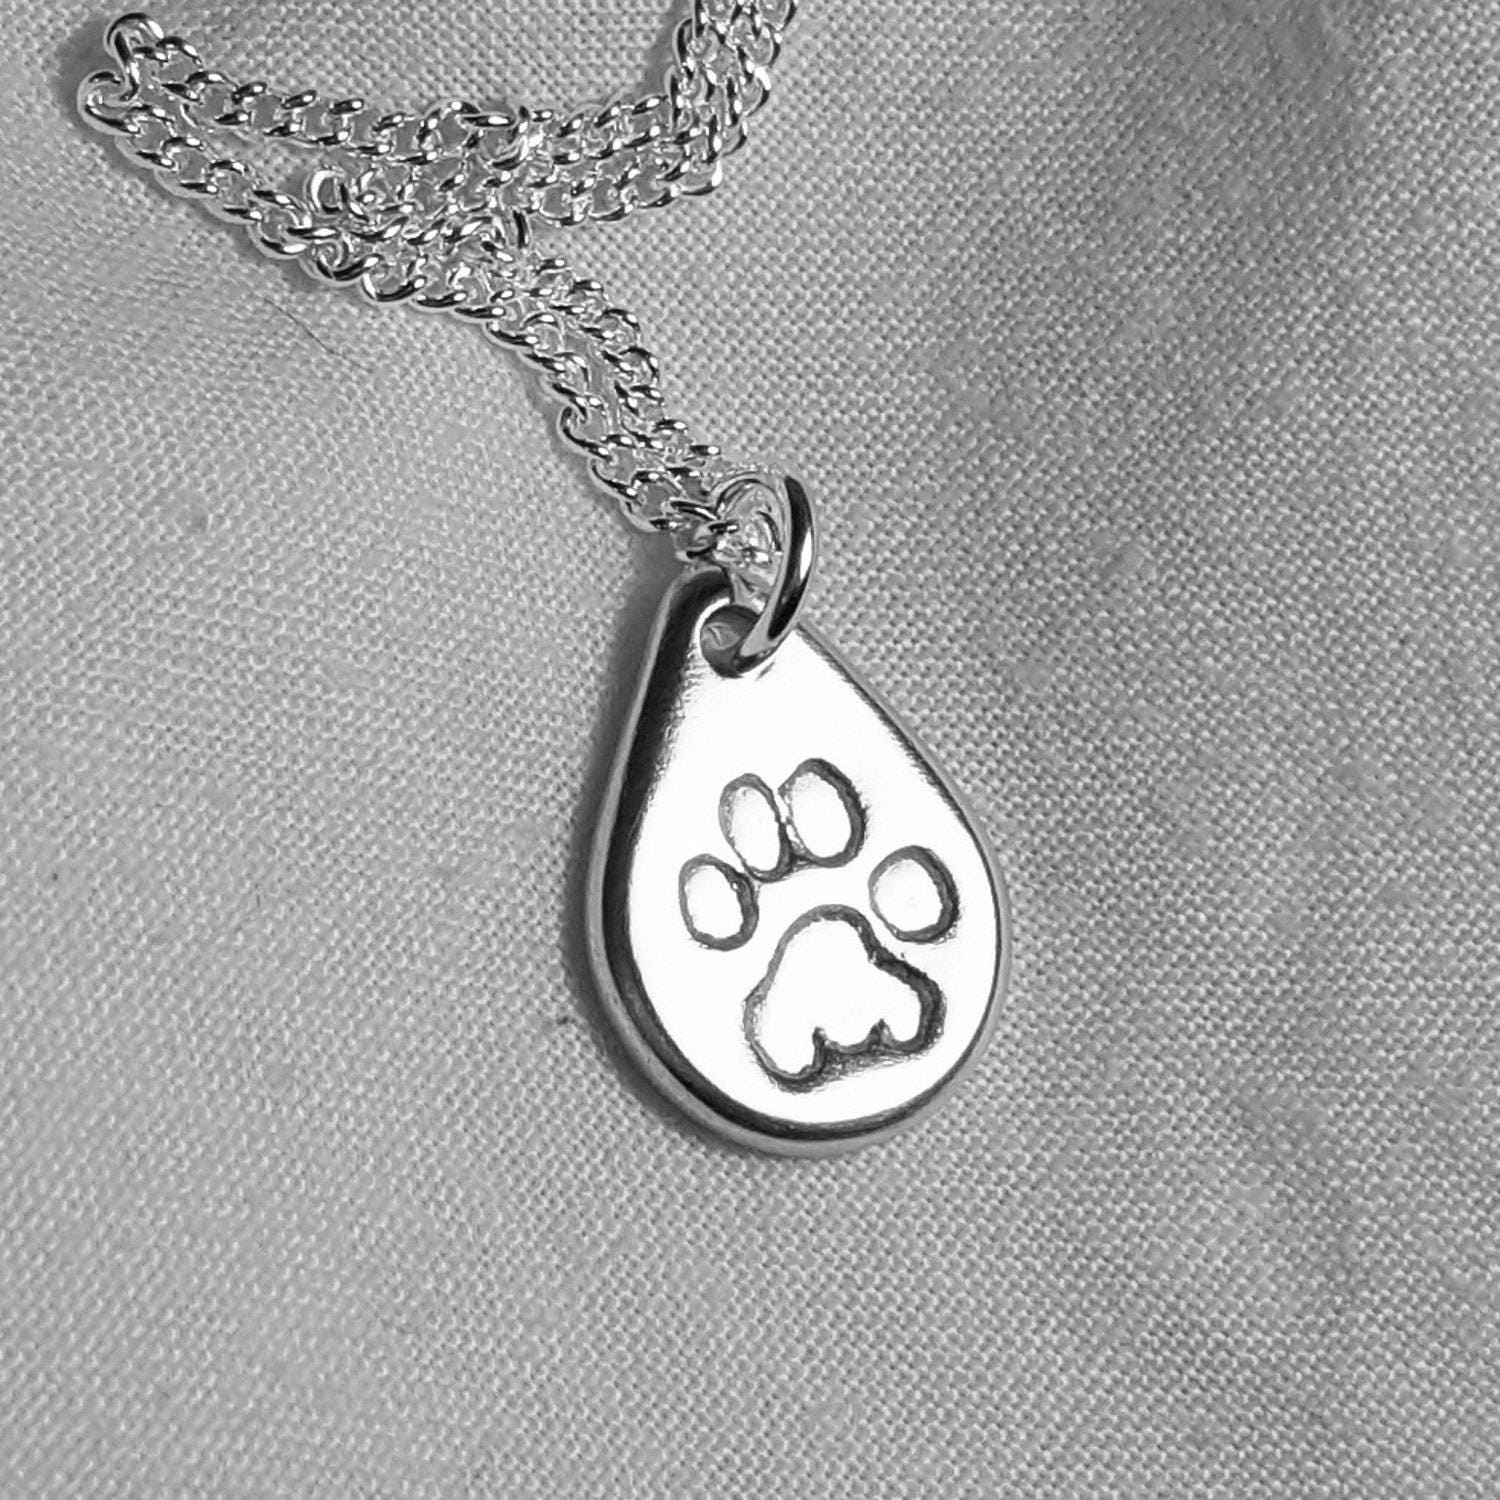 Paw Print Necklace - Personalised Jewellery Dog Lover Necklace Cat Jewelry Pet Memorial